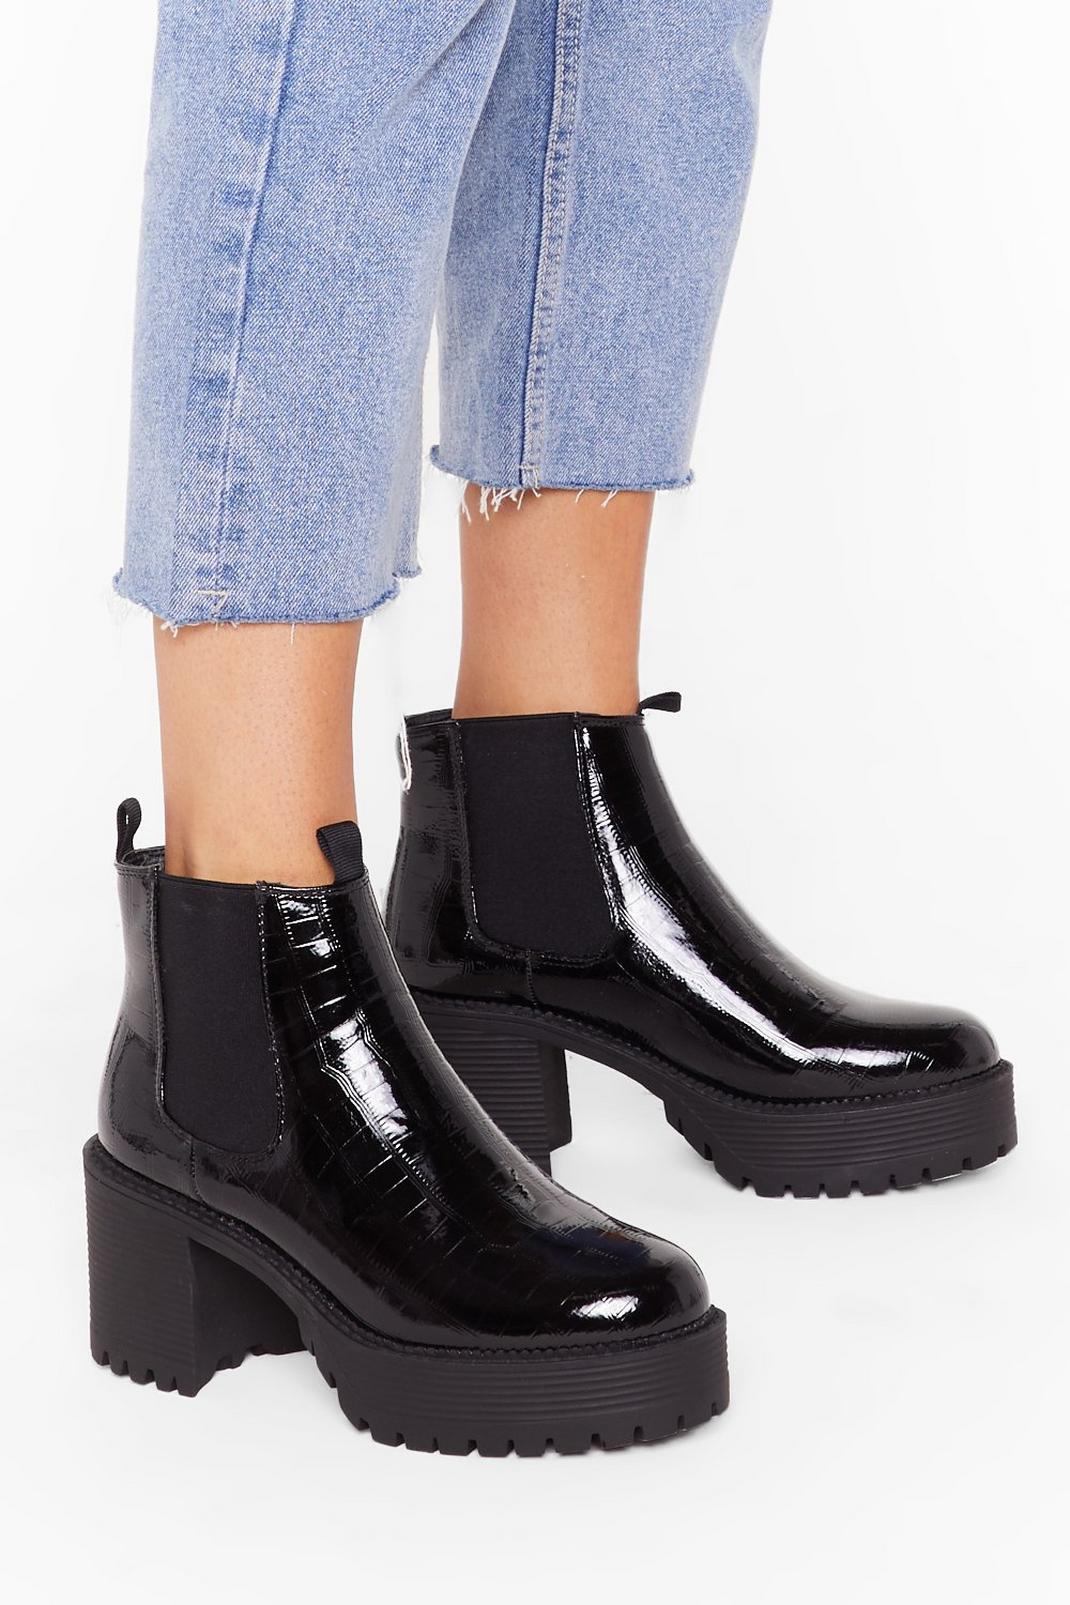 Croc What You're Doin' Patent Heeled Boots image number 1